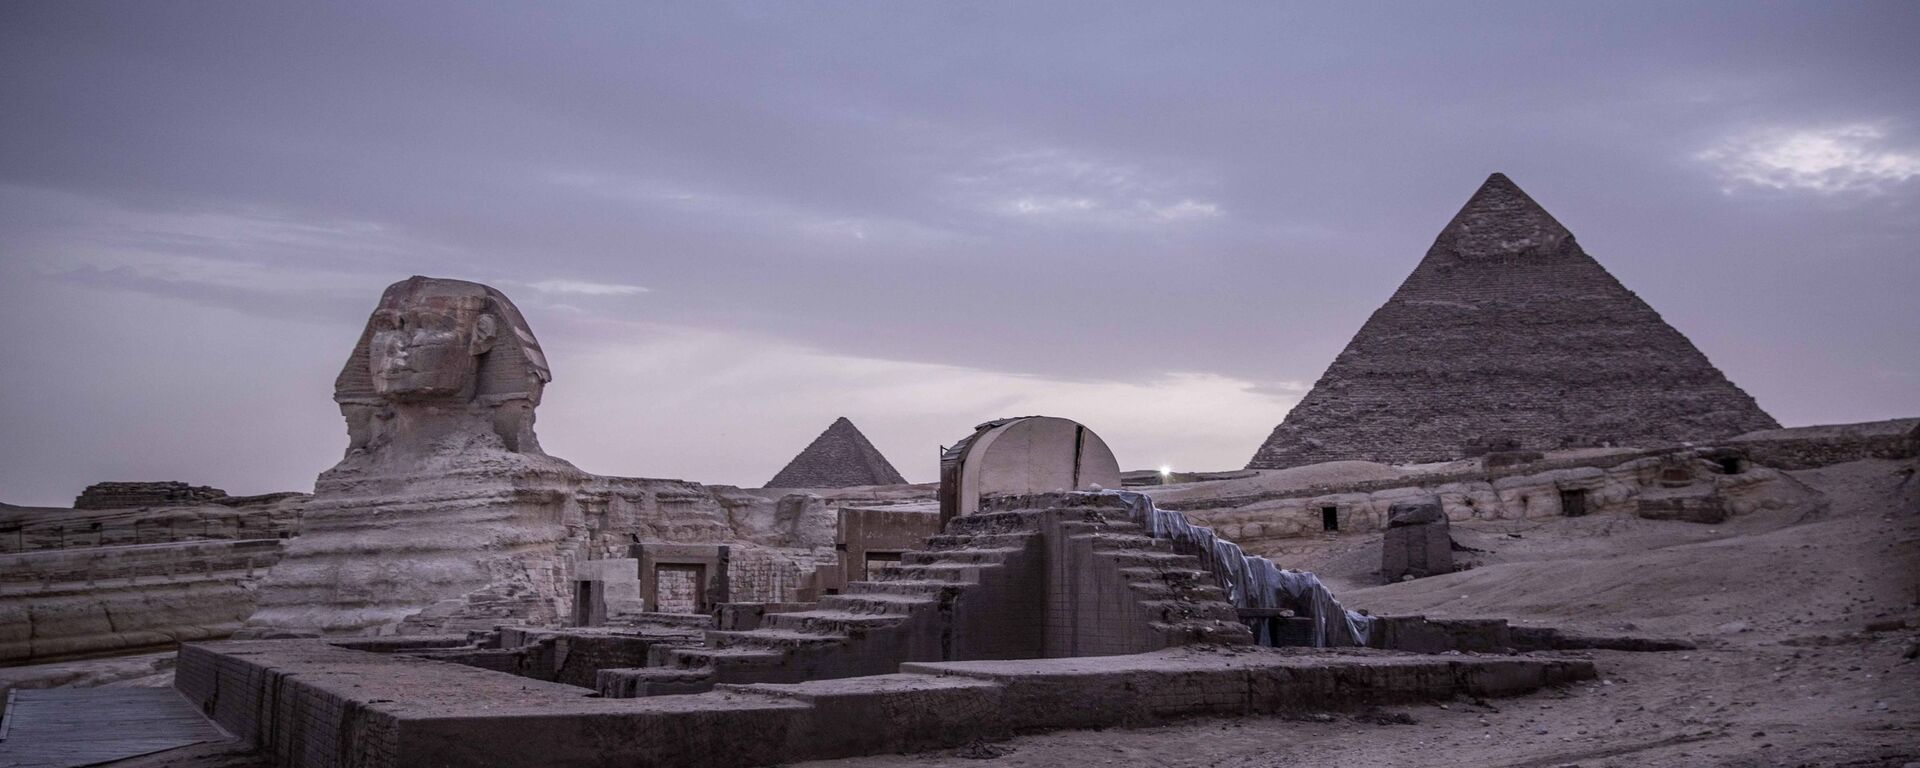 This March 30, 2020 file photo, shows the empty Giza Pyramids and Sphinx complex on lockdown due to the coronavirus outbreak in Egypt. In July, fearing further economic fallout, the government reopened much of society and welcomed hundreds of international tourists back to resorts, even as daily reported deaths exceeded 80. Restaurants and cafes are reopening with some continued restrictions, and masks have been mandated in public - Sputnik International, 1920, 23.01.2022